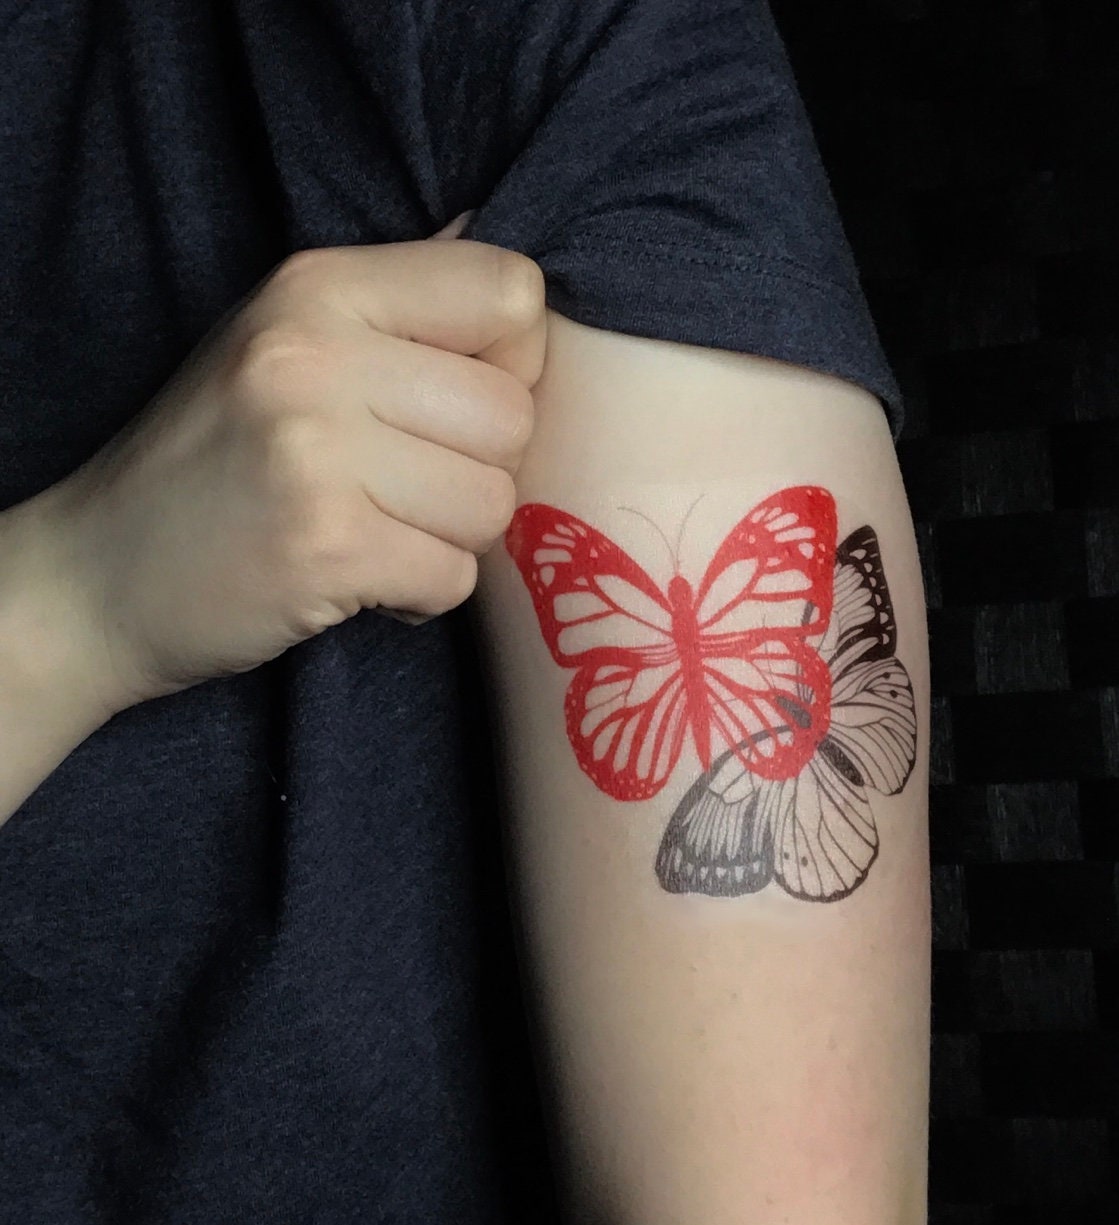 All red butterfly from Matt at Iron and Gold tattoo in Spokane WA  Absolutely love this shop and artist  rtattoos